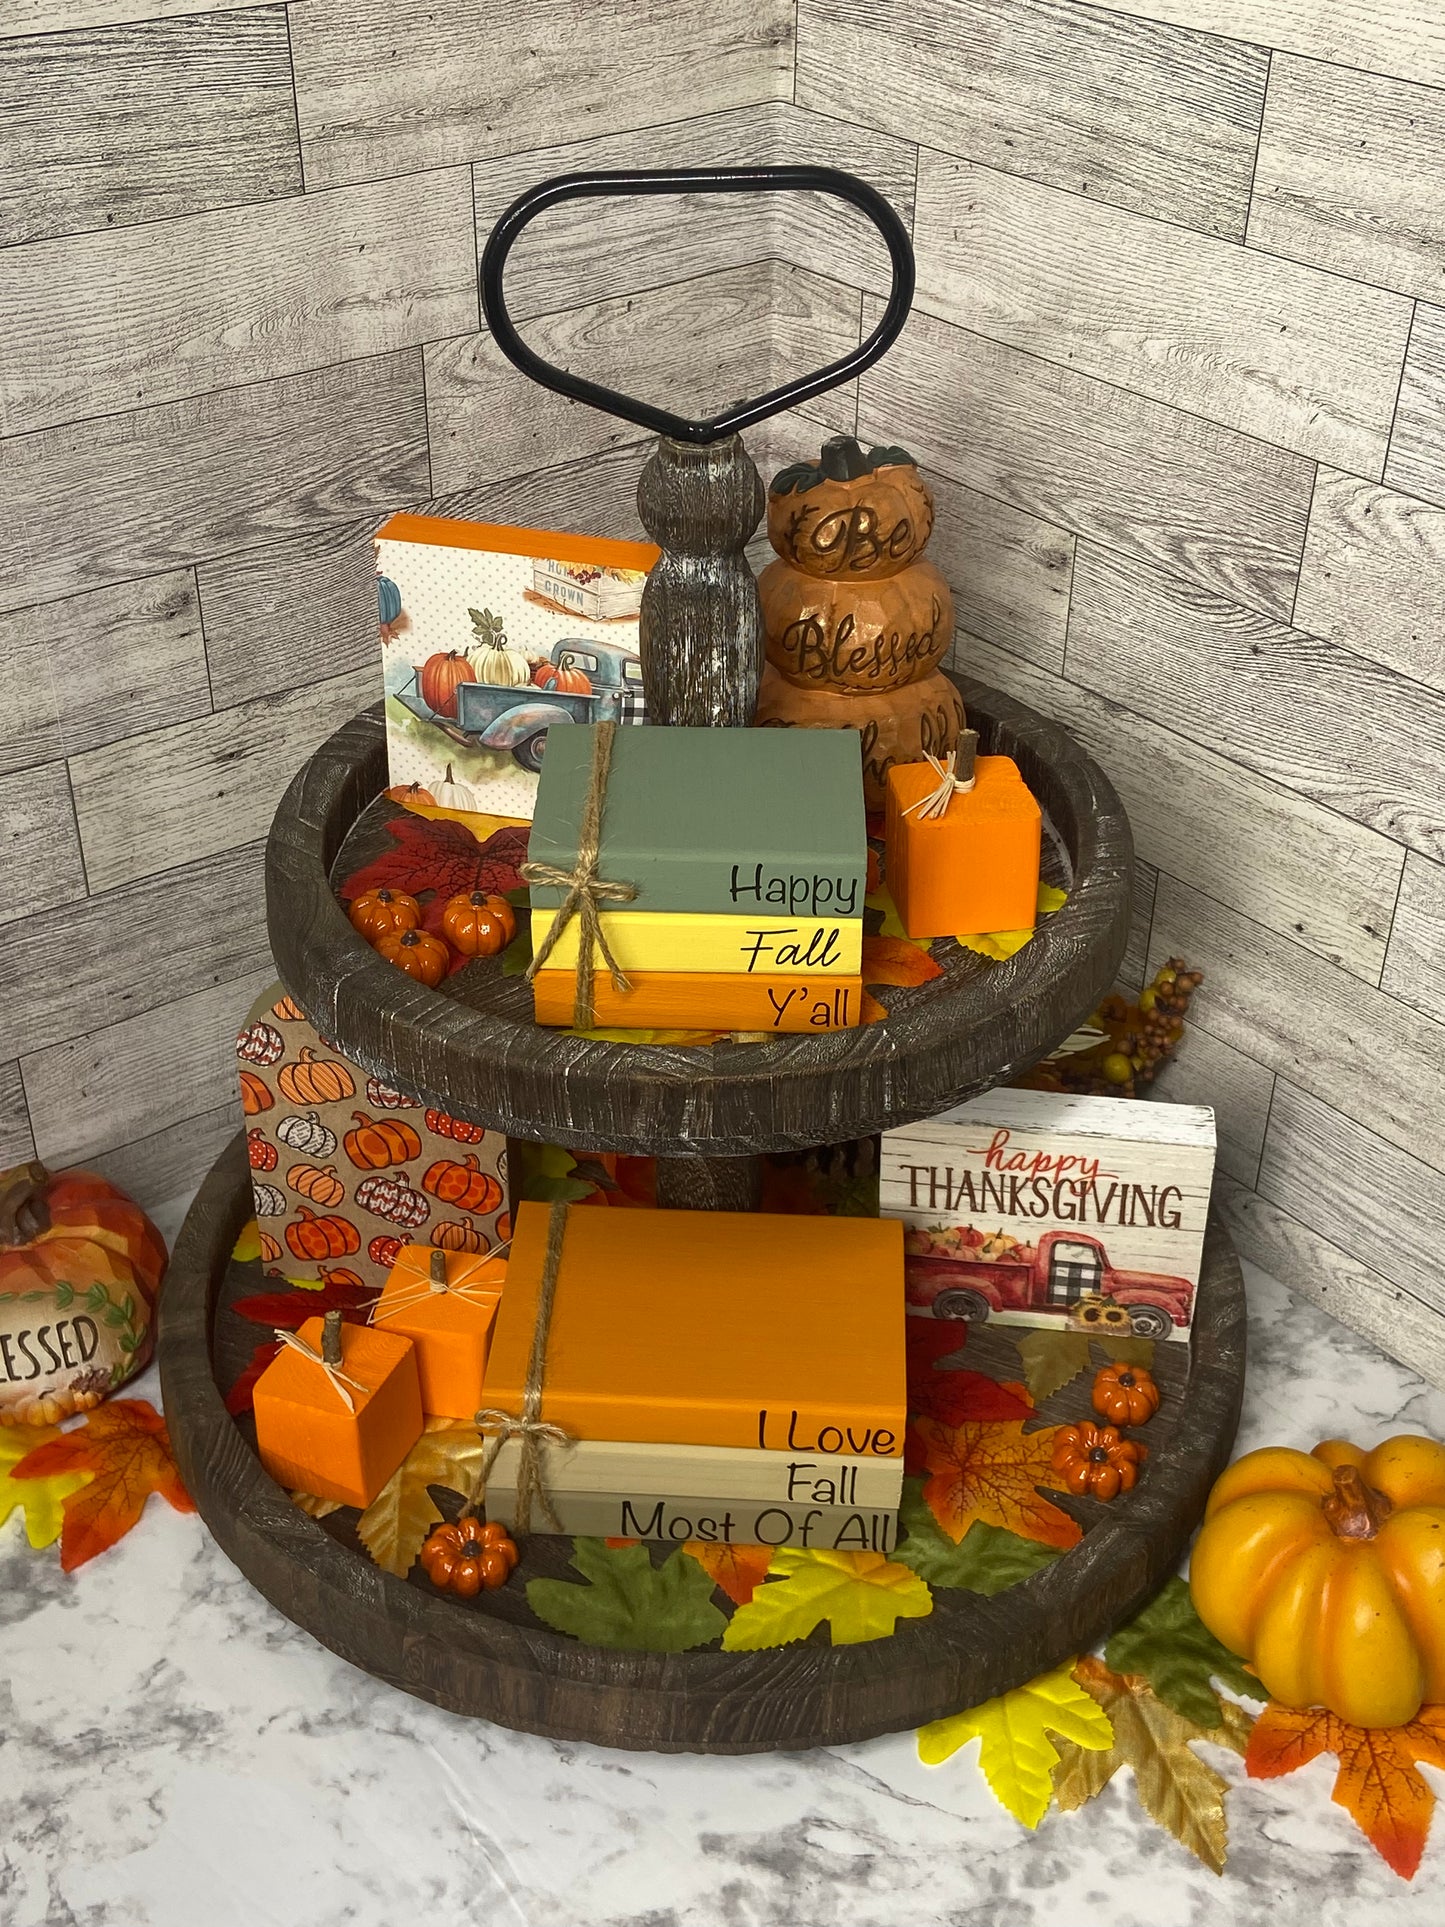 Happy Thanksgiving - Tiered Tray Sign